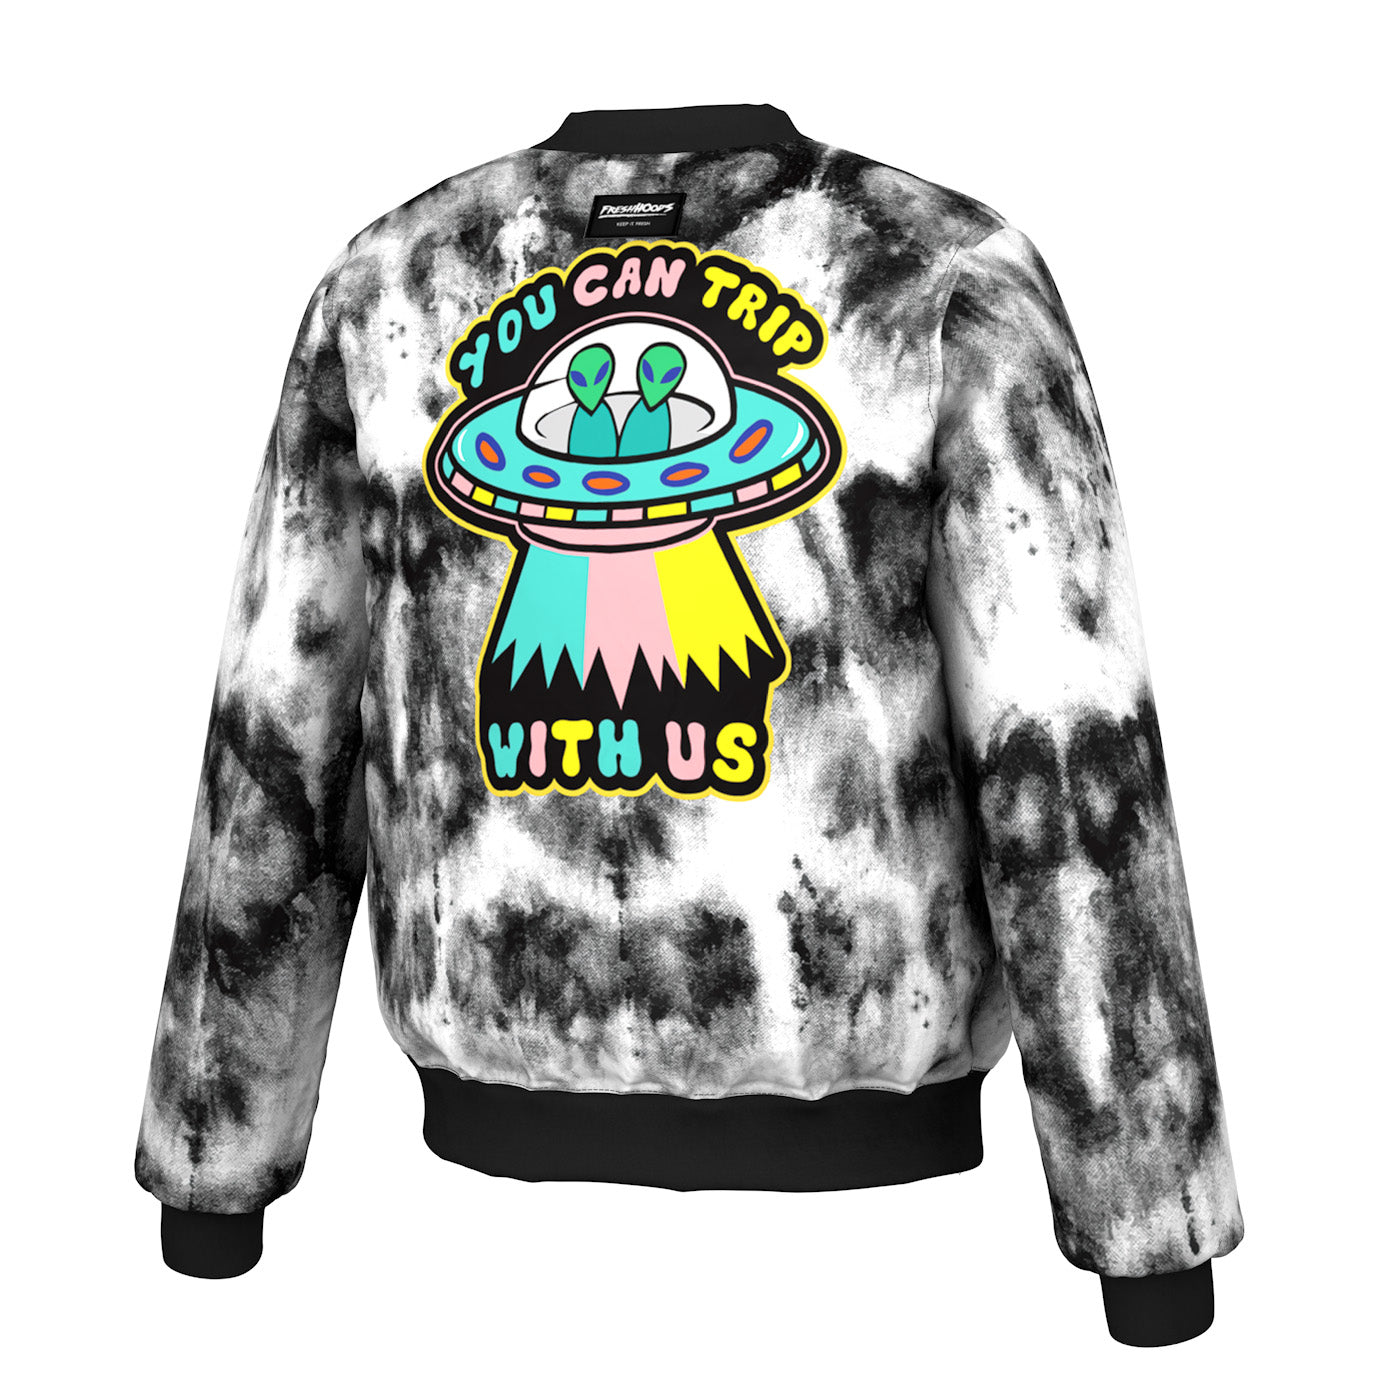 You Can Trip With Us Bomber Jacket